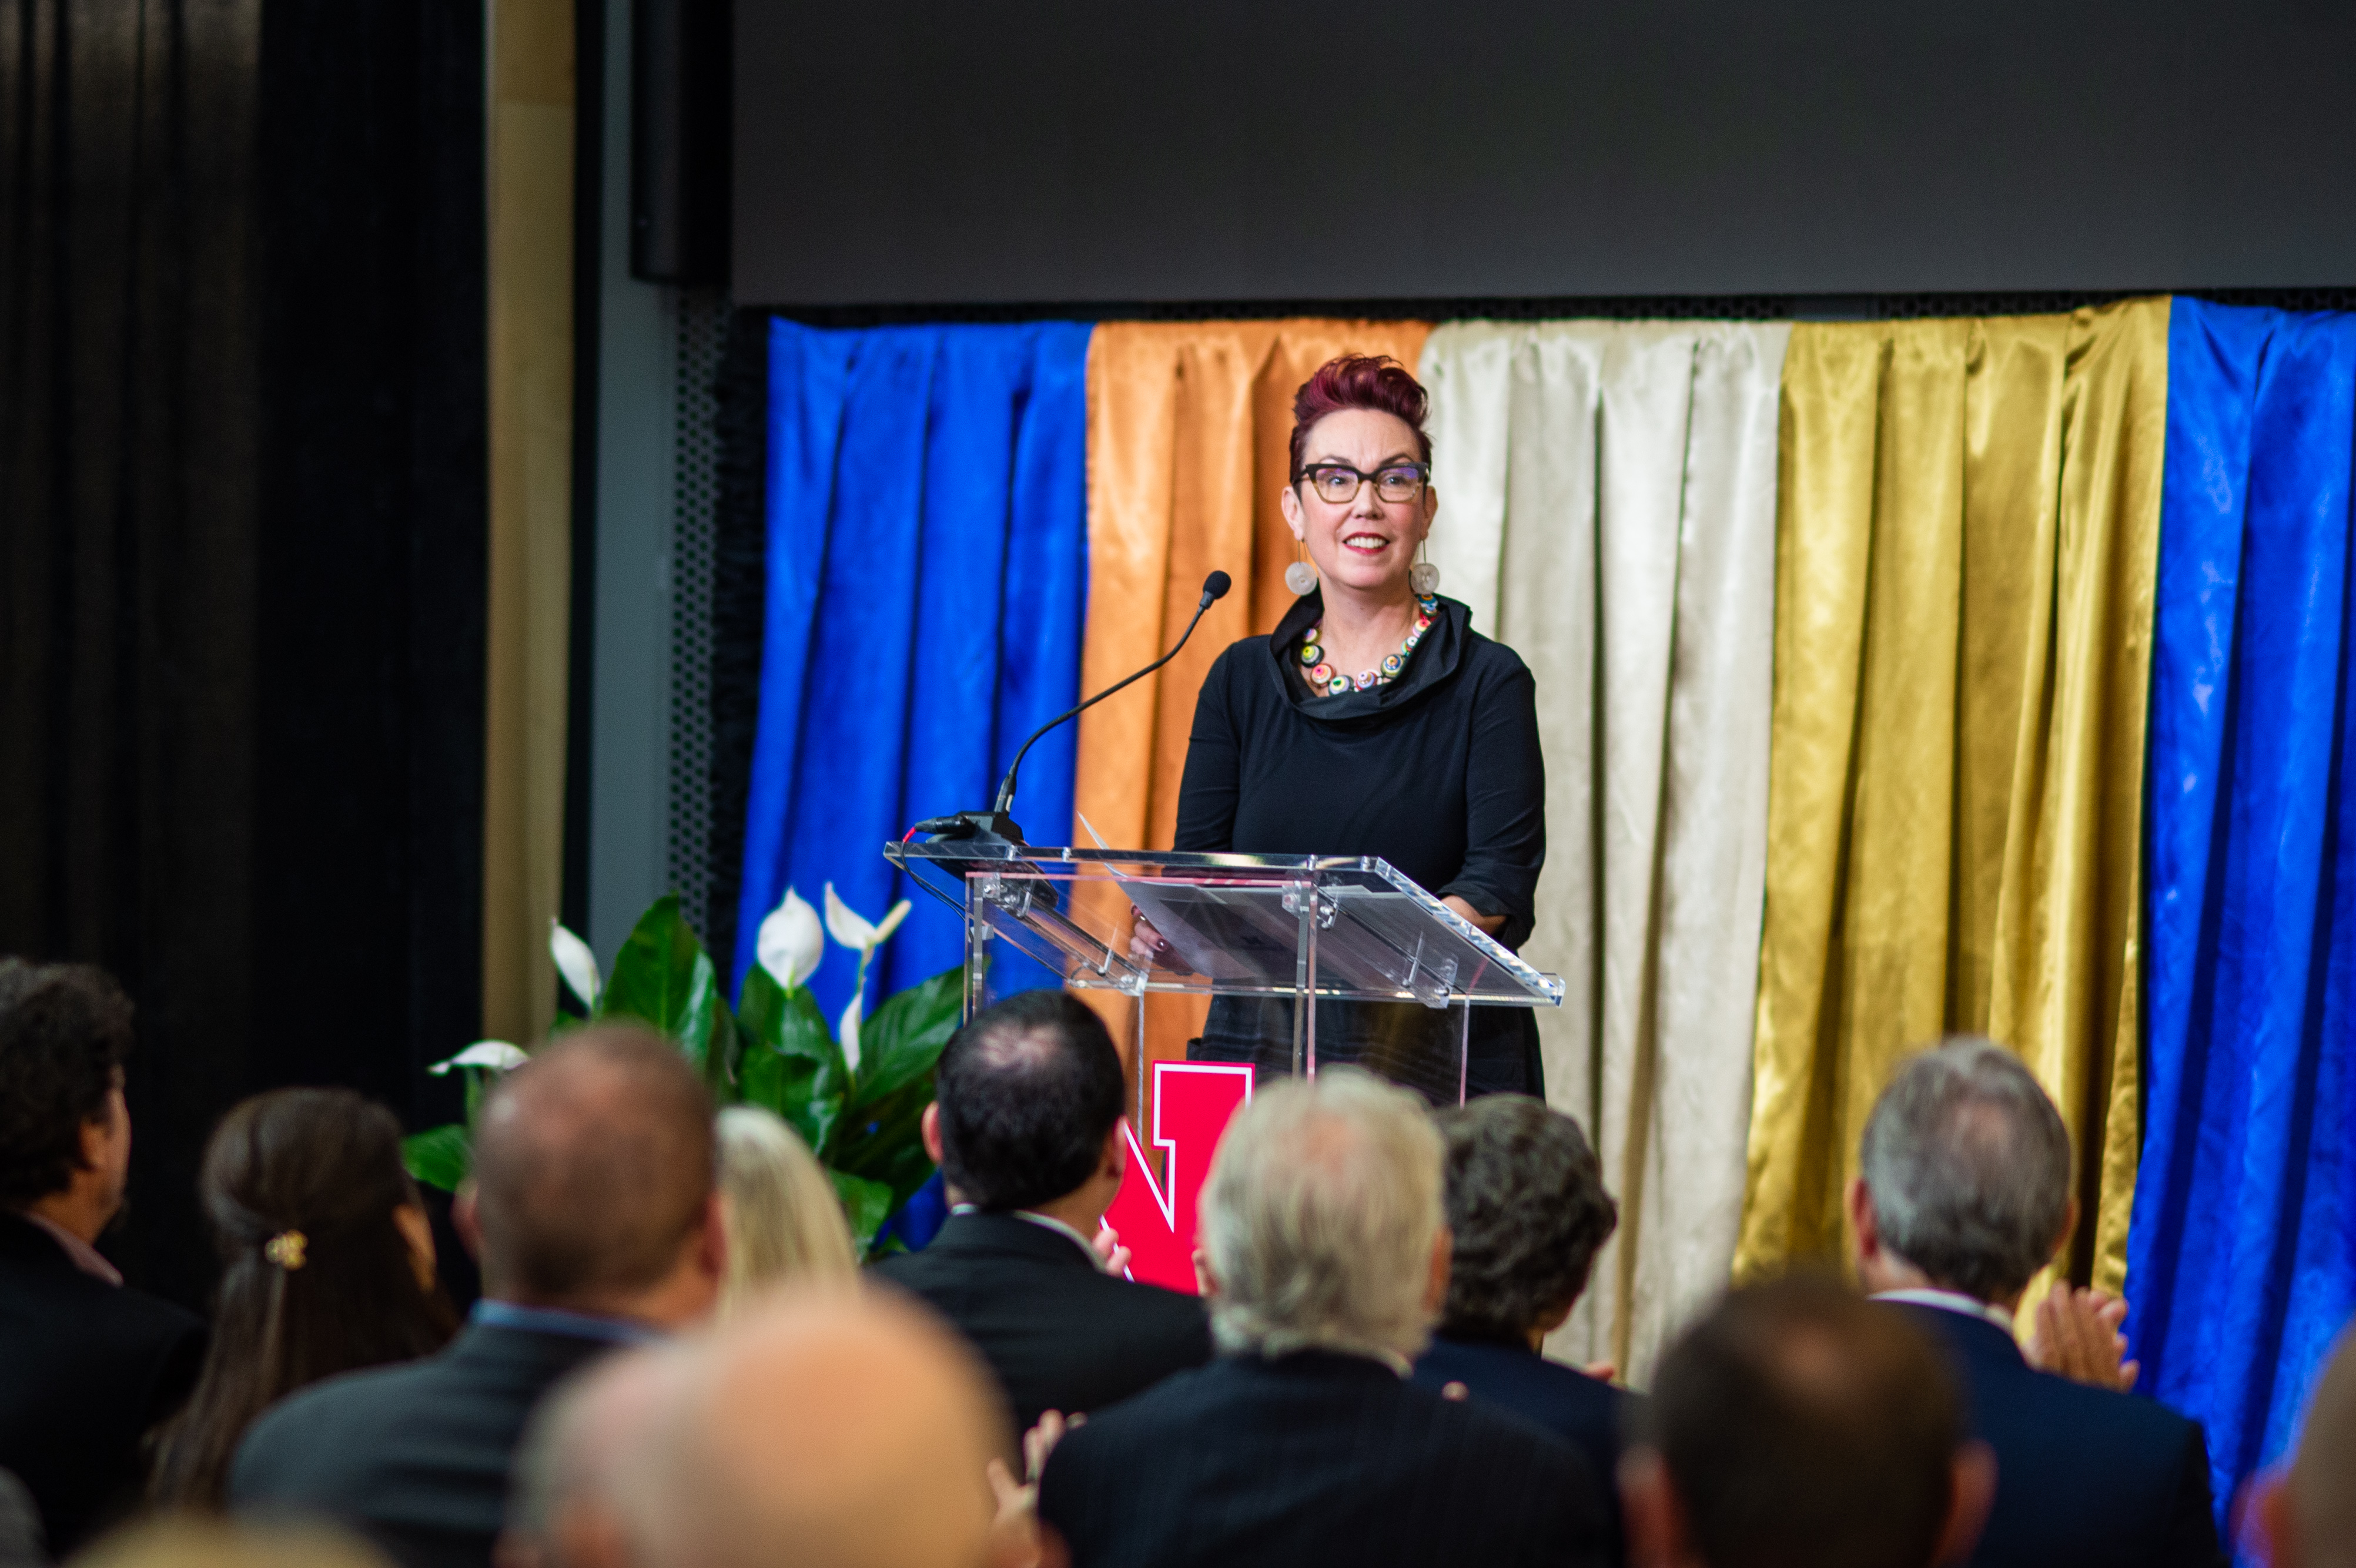 iott speaks at the dedication of the Johnny Carson Center for Emerging Media Arts in 2019. Elliott is the inaugural Johnny Carson Endowed Director in Emerging Media Arts. (Justin Mohling/University Communication and Marketing)